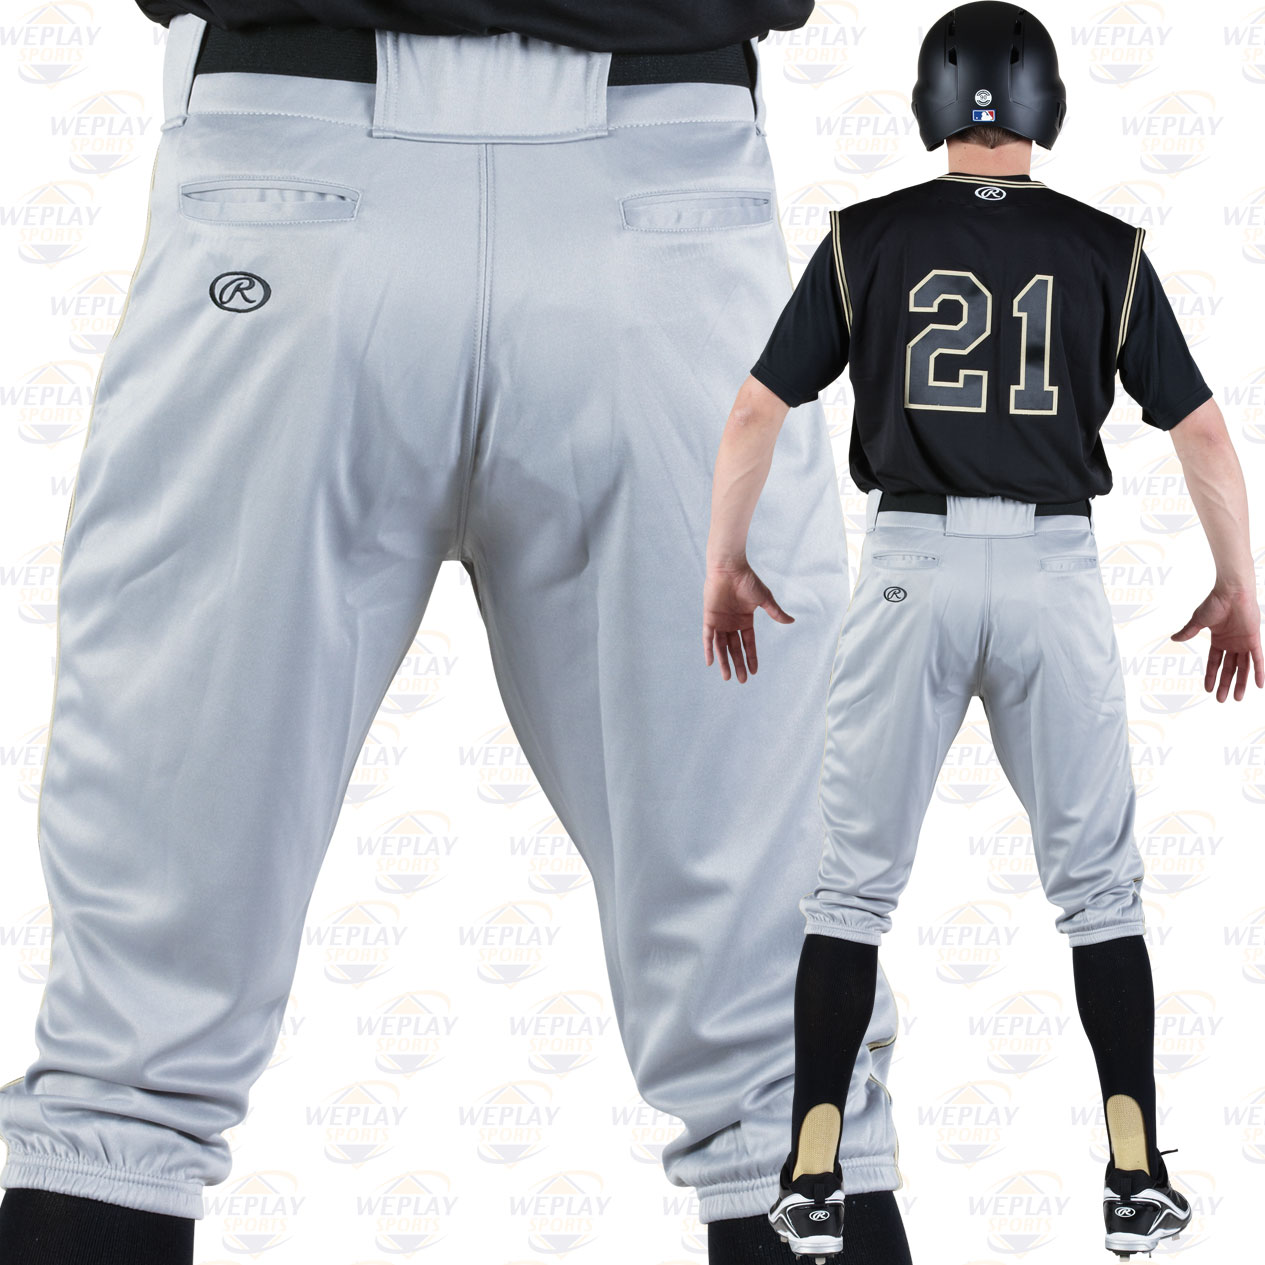 under armour knicker baseball pants youth